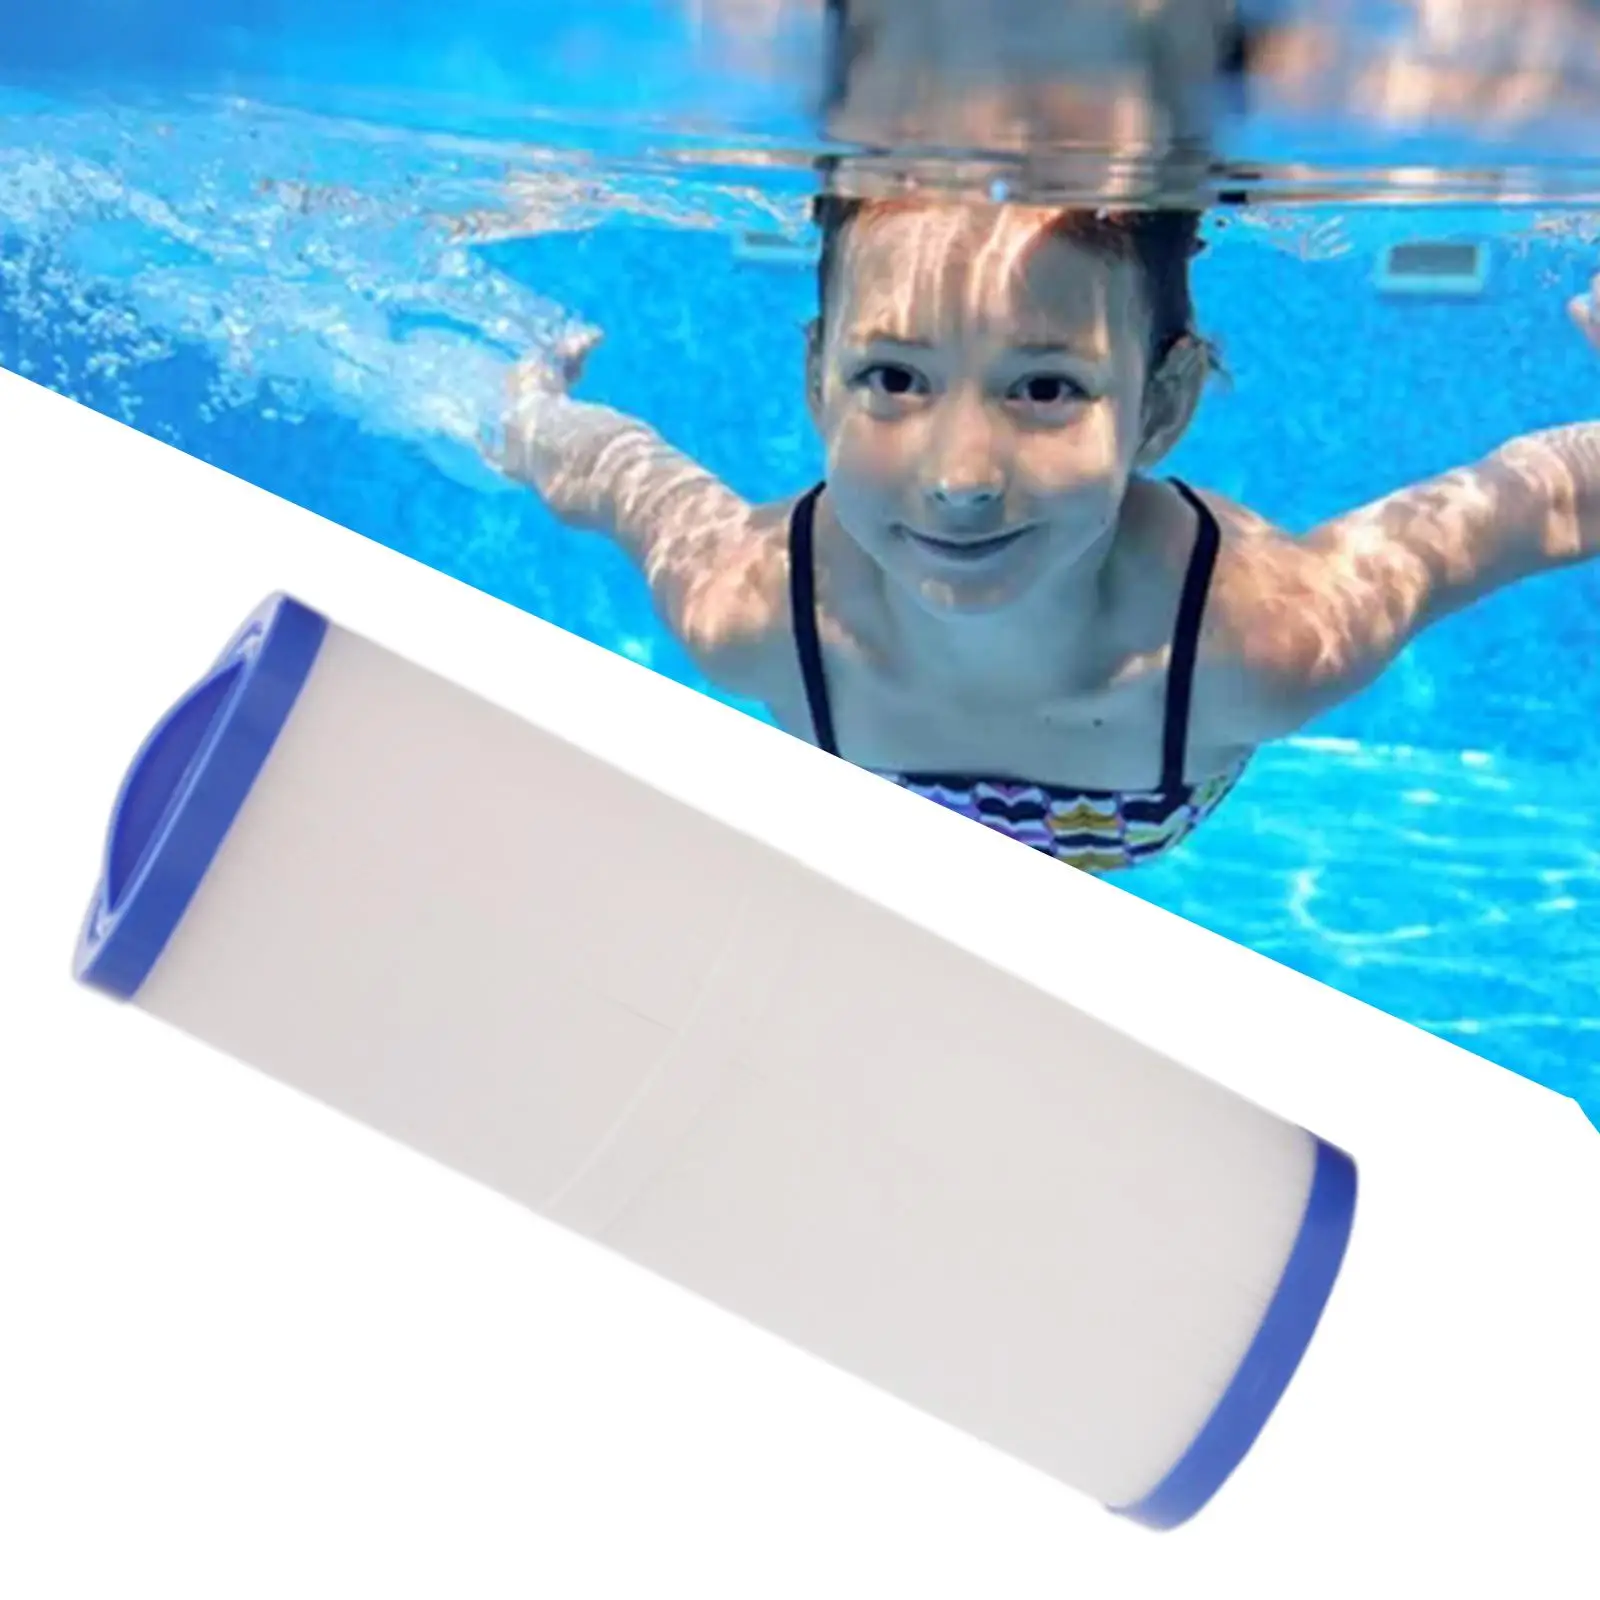  Cartridge Replacement Durable Plastic Lightweight Compact Hot Tub Thicken Replacement  Pool Filter for Pww50L 4CH-949